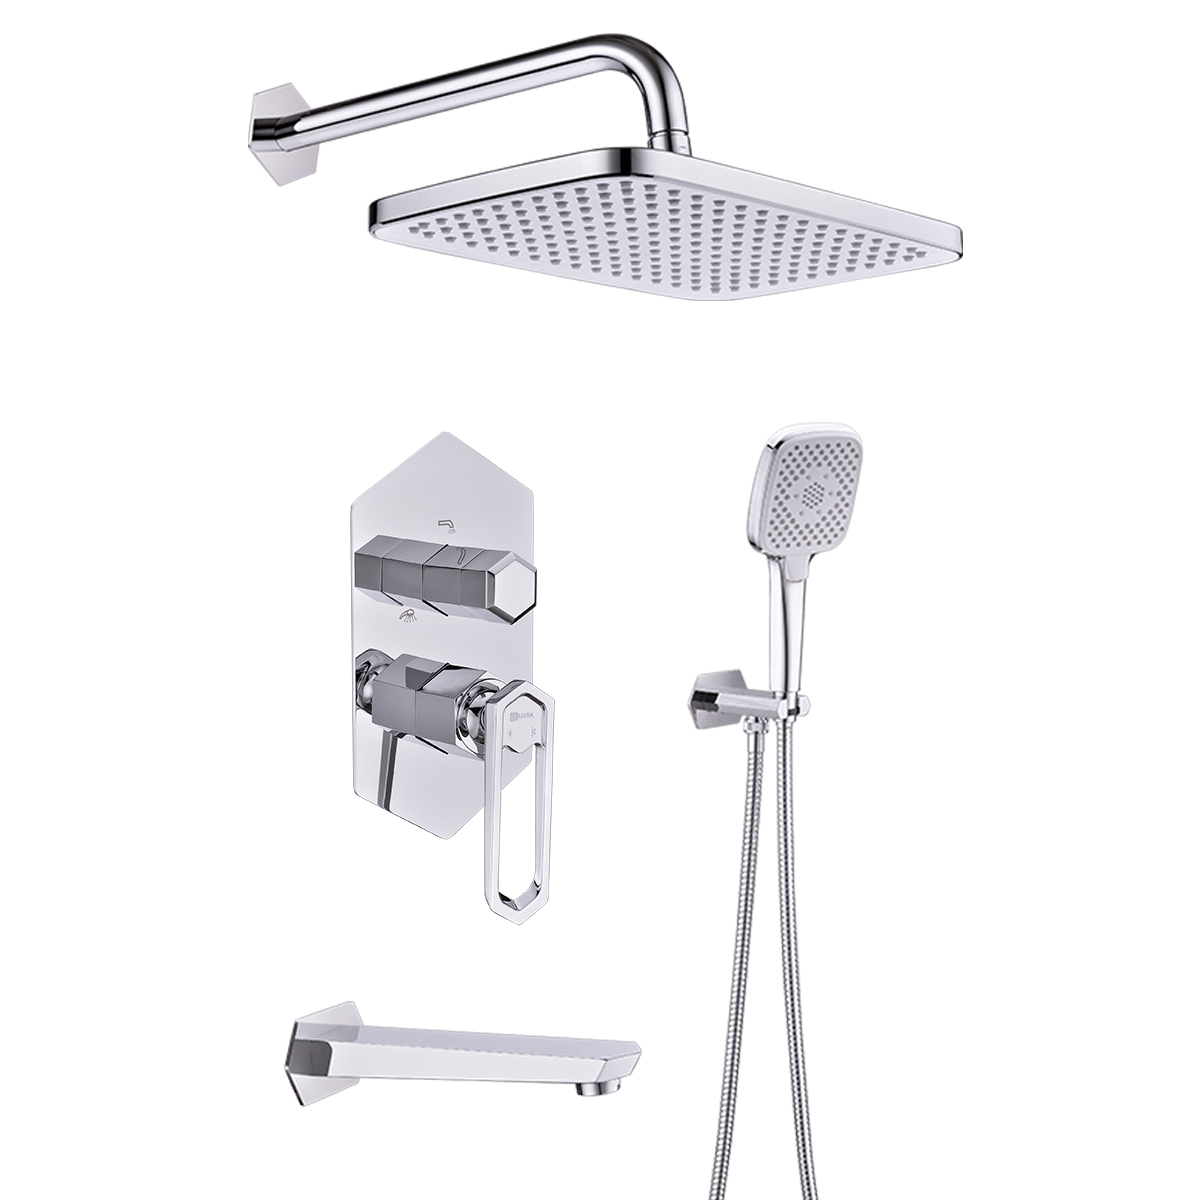 LM3922C Built-in bath and shower faucet